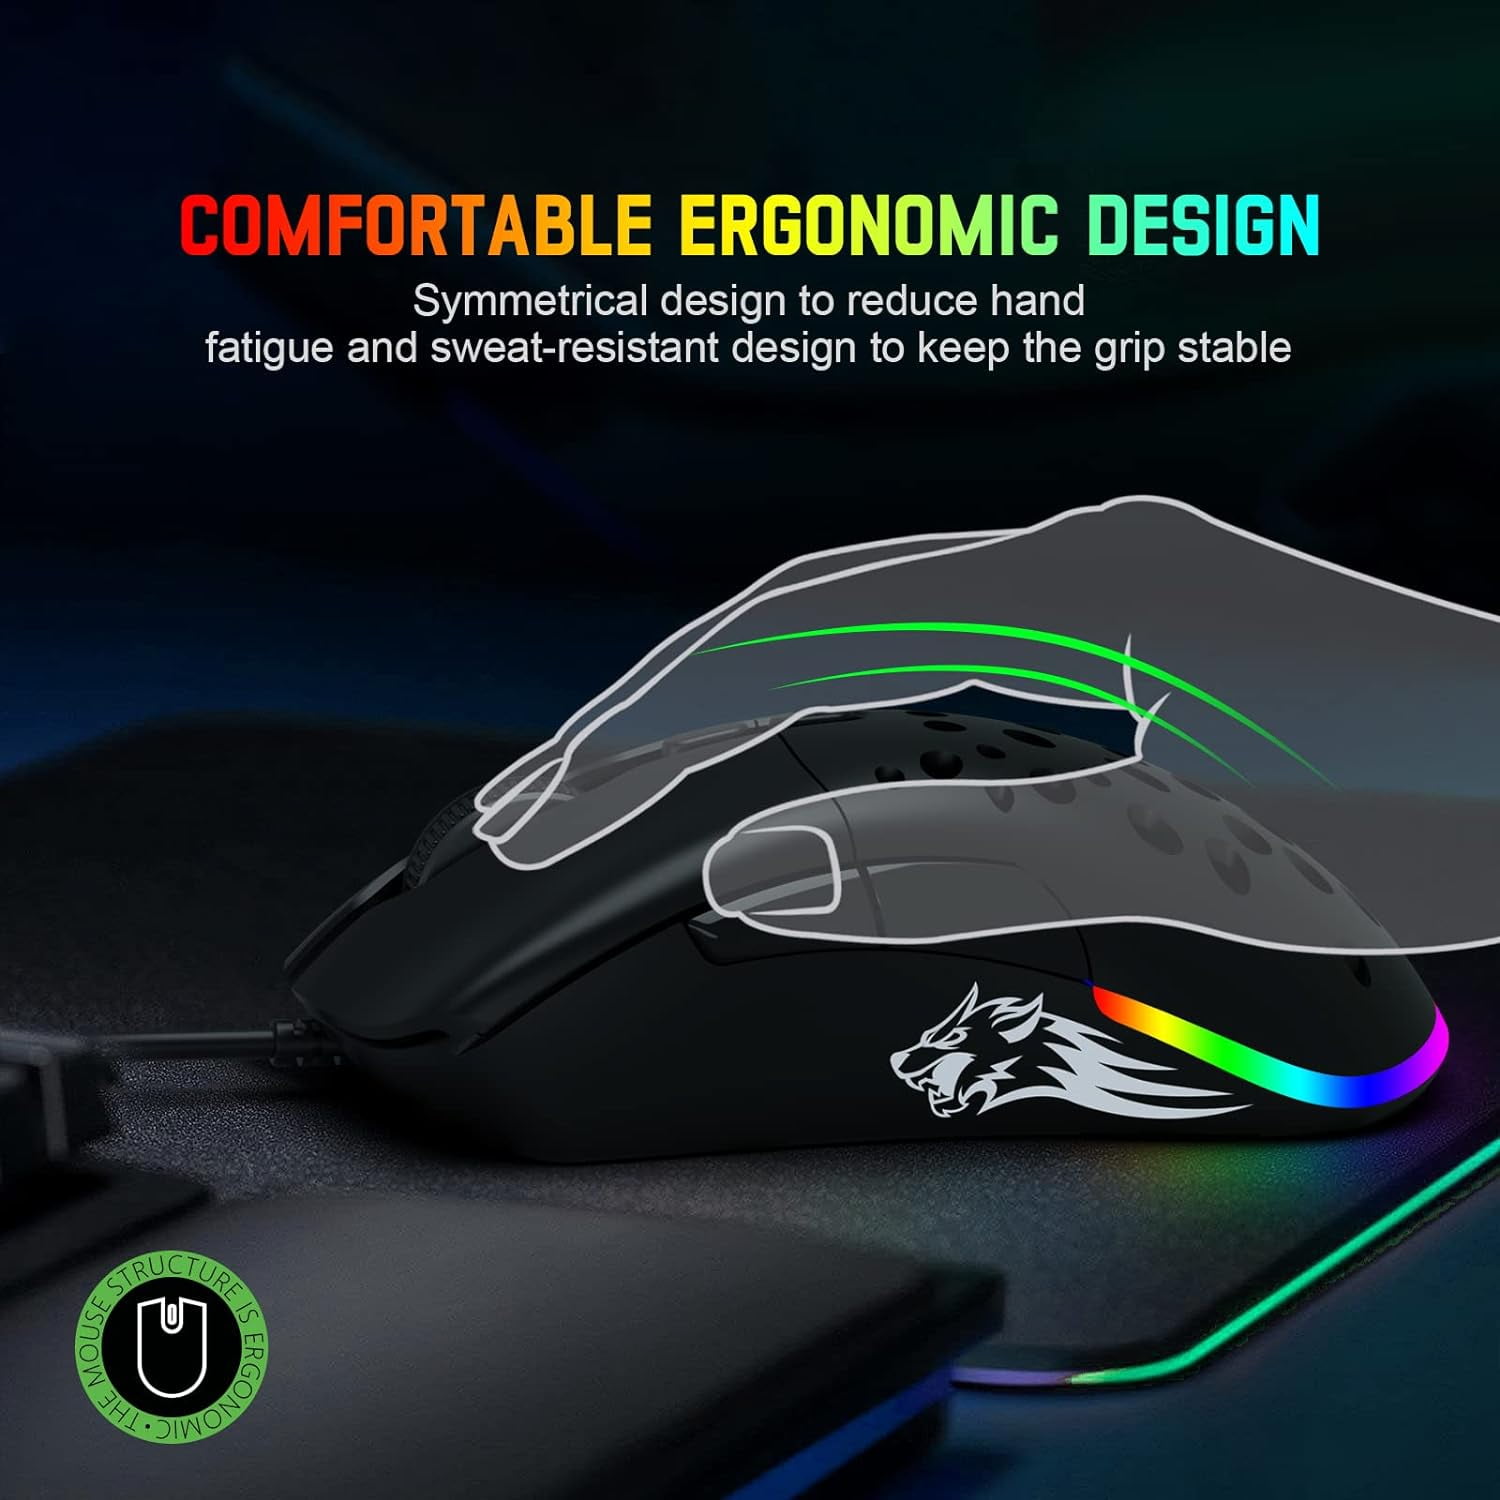 SOURIS GAMING 9 BOUTONS RGB EAGLE CLAW SUREFIRE